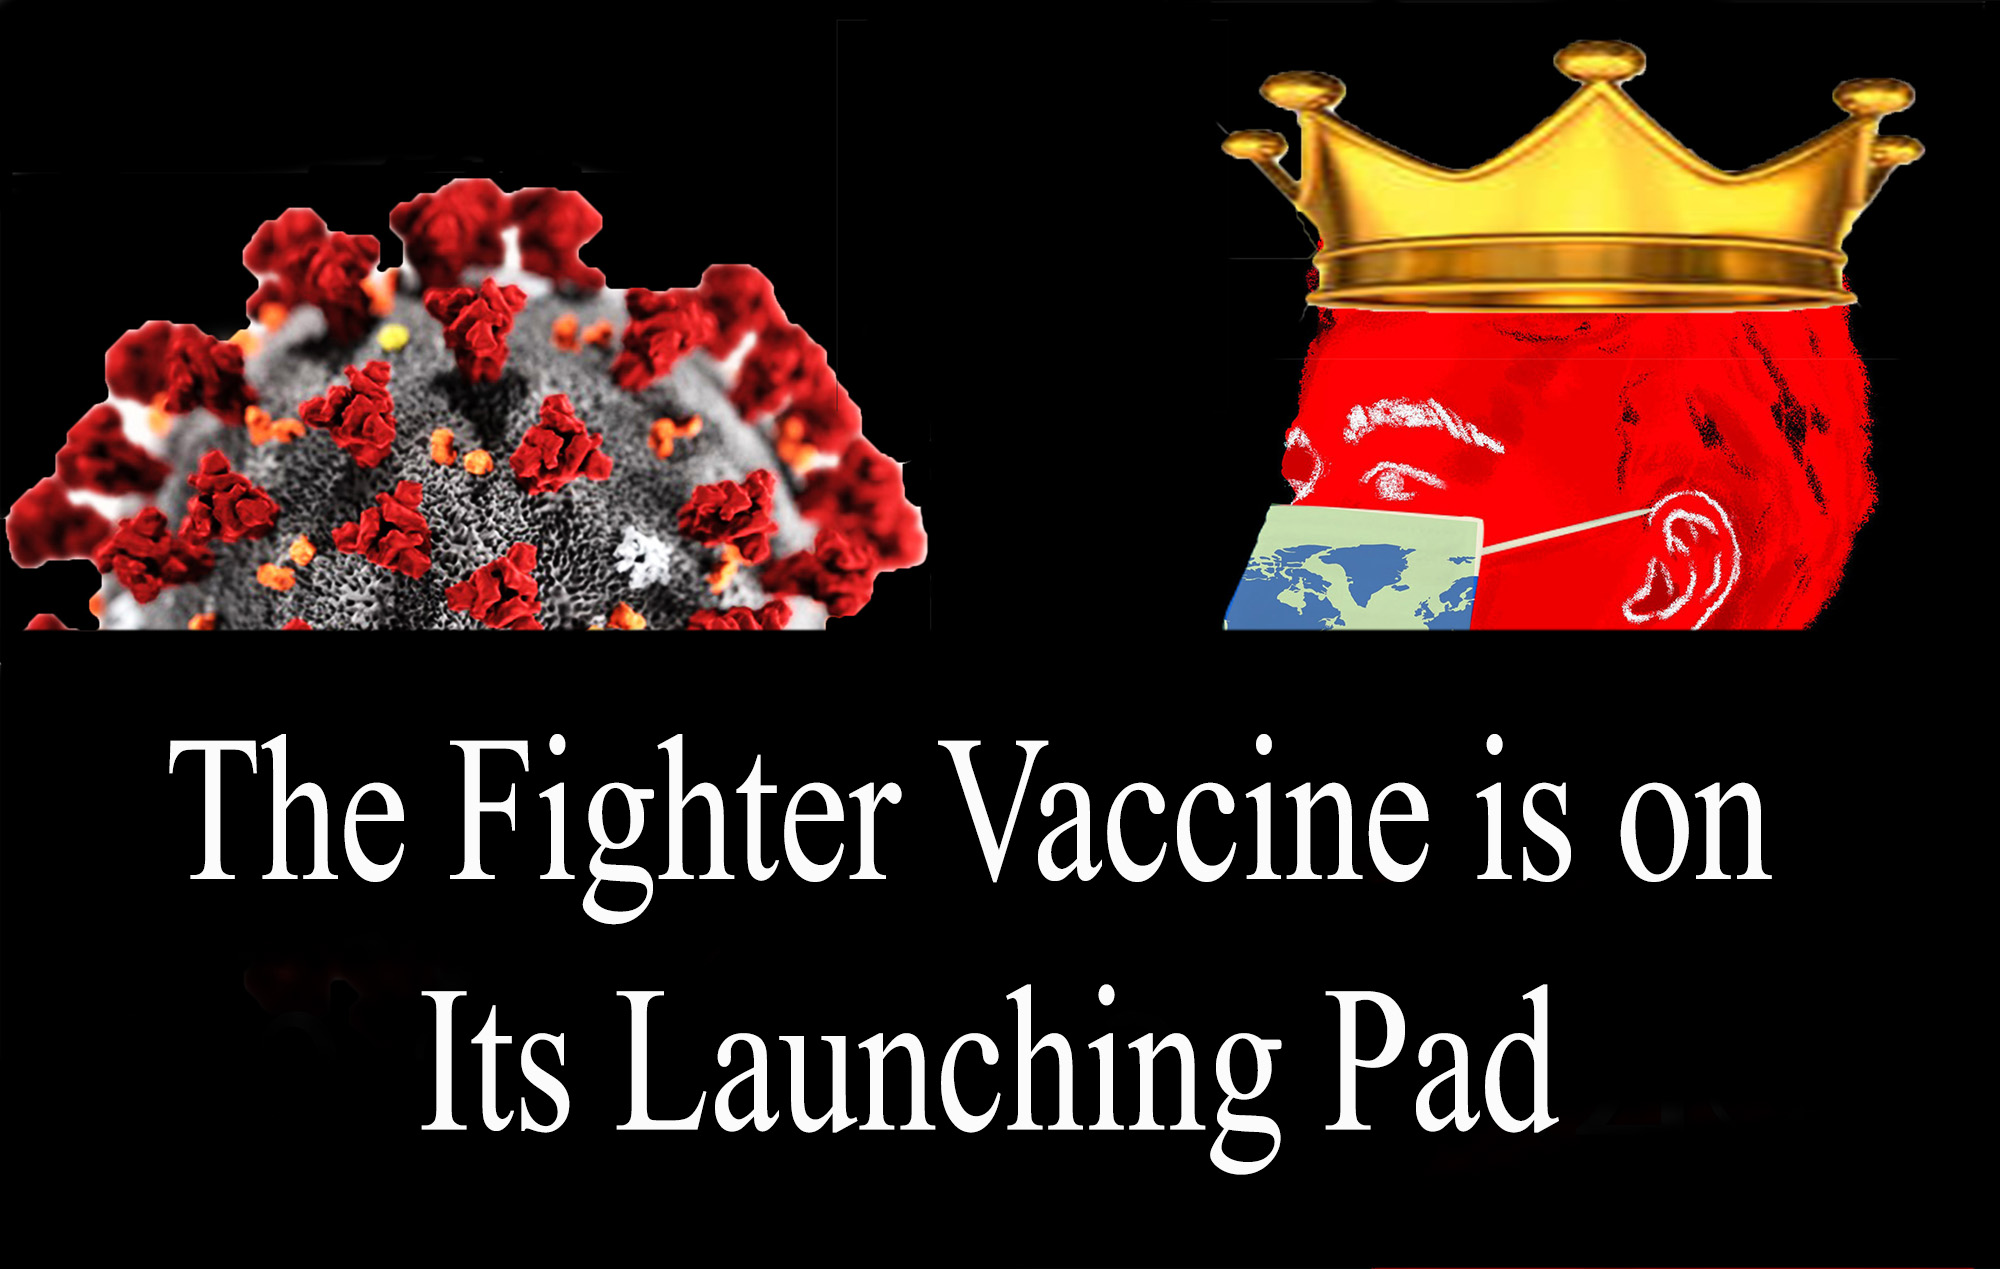 BBC reports: The fighter vaccine against COVID-19 is on trial.